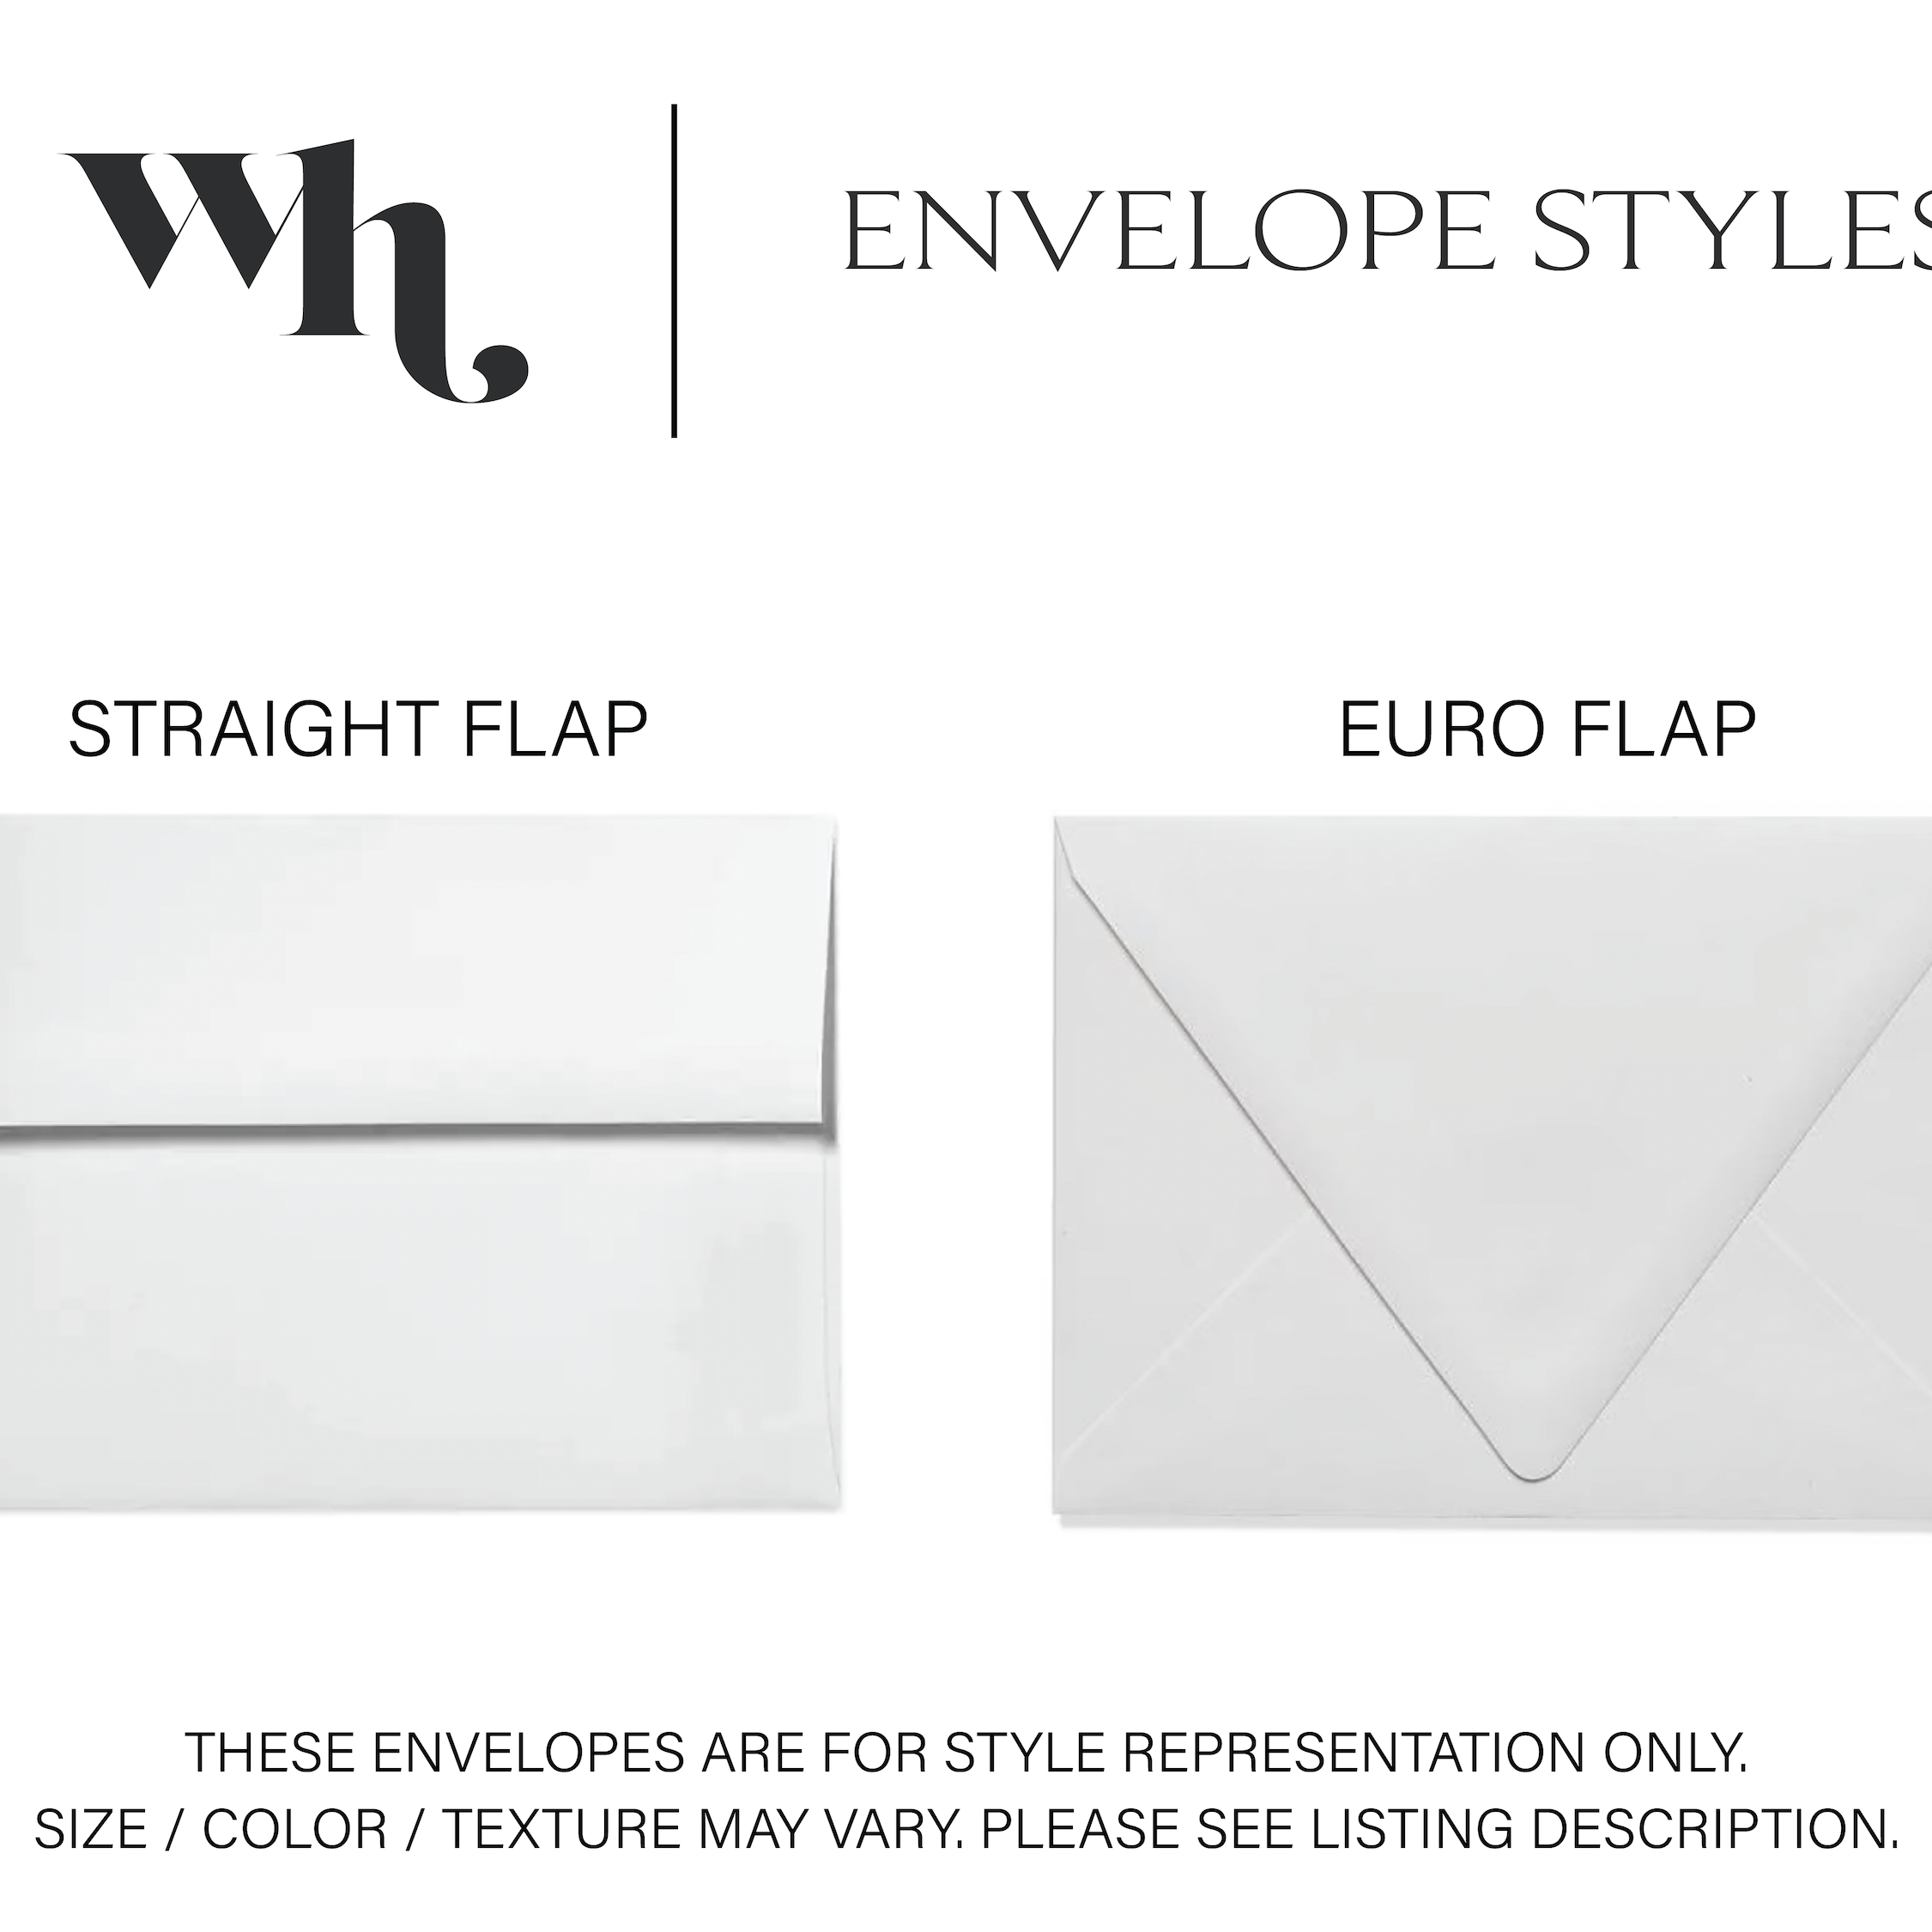 envelopes styles in straight flap and euro flap